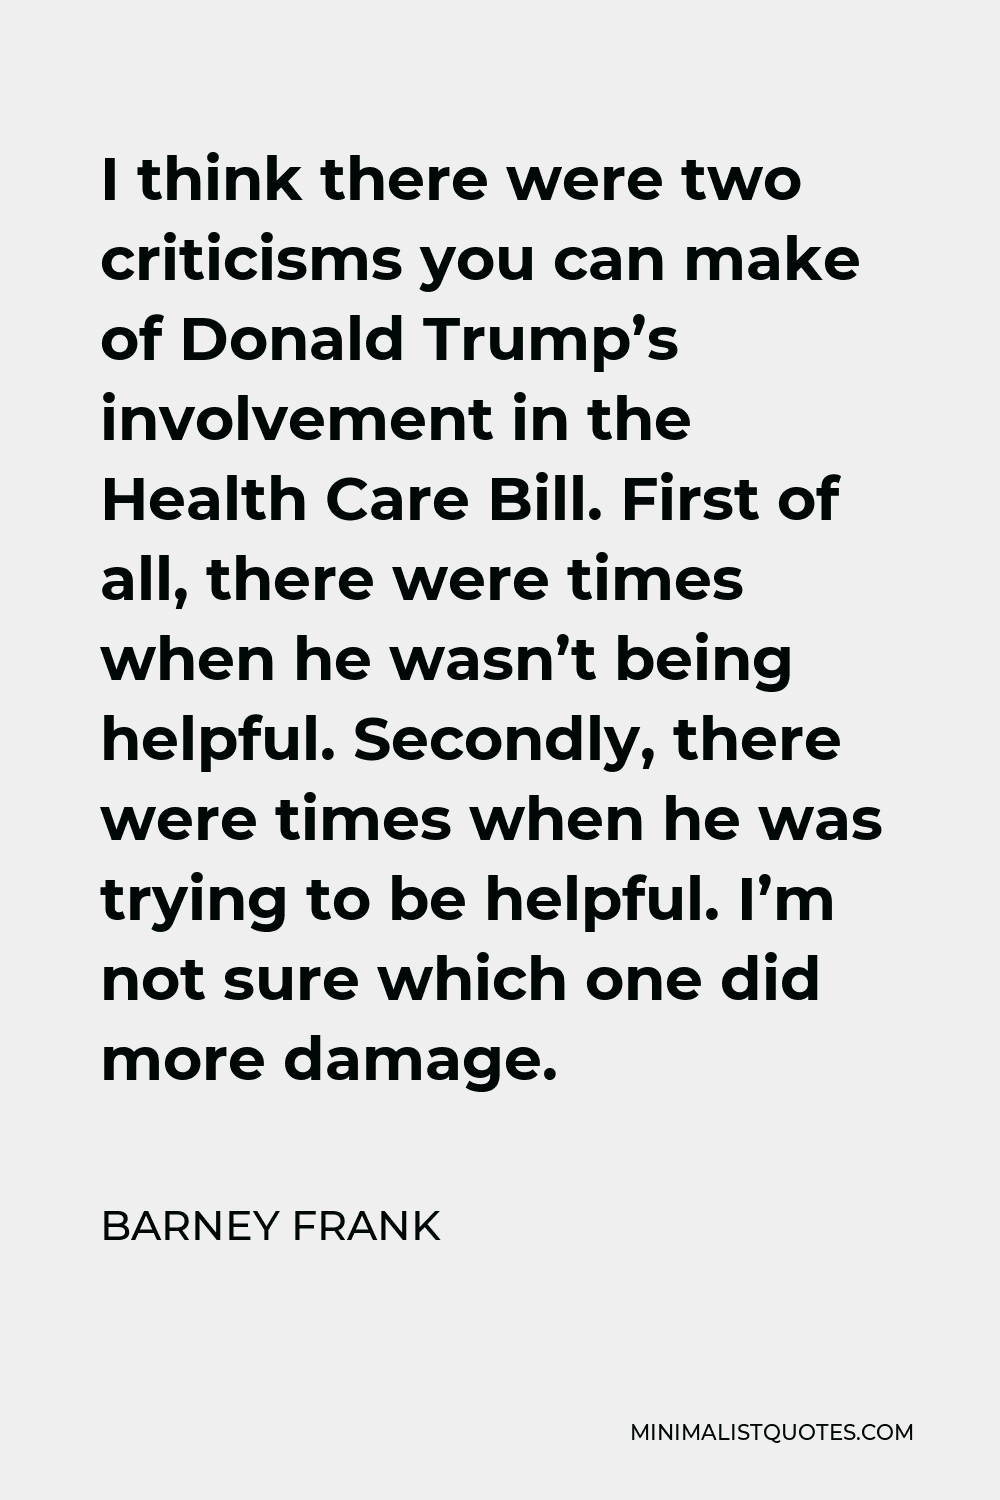 Barney Frank Quote - I think there were two criticisms you can make of Donald Trump’s involvement in the Health Care Bill. First of all, there were times when he wasn’t being helpful. Secondly, there were times when he was trying to be helpful. I’m not sure which one did more damage.